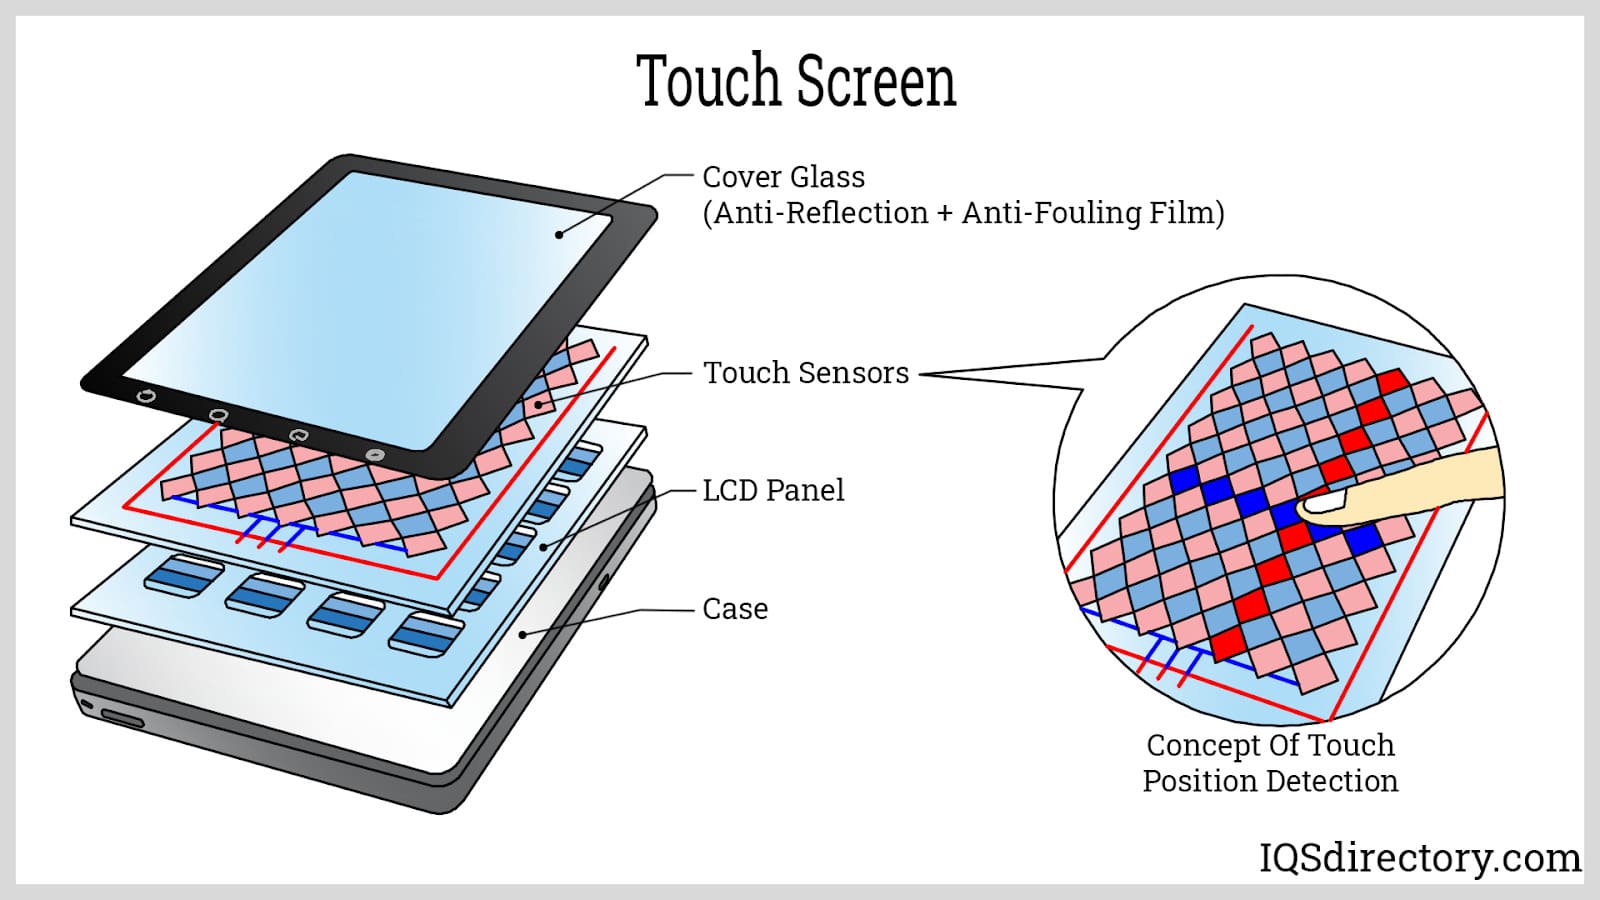 Capacitive Touch Screen: What Is It? How Does It Work?, 52% OFF